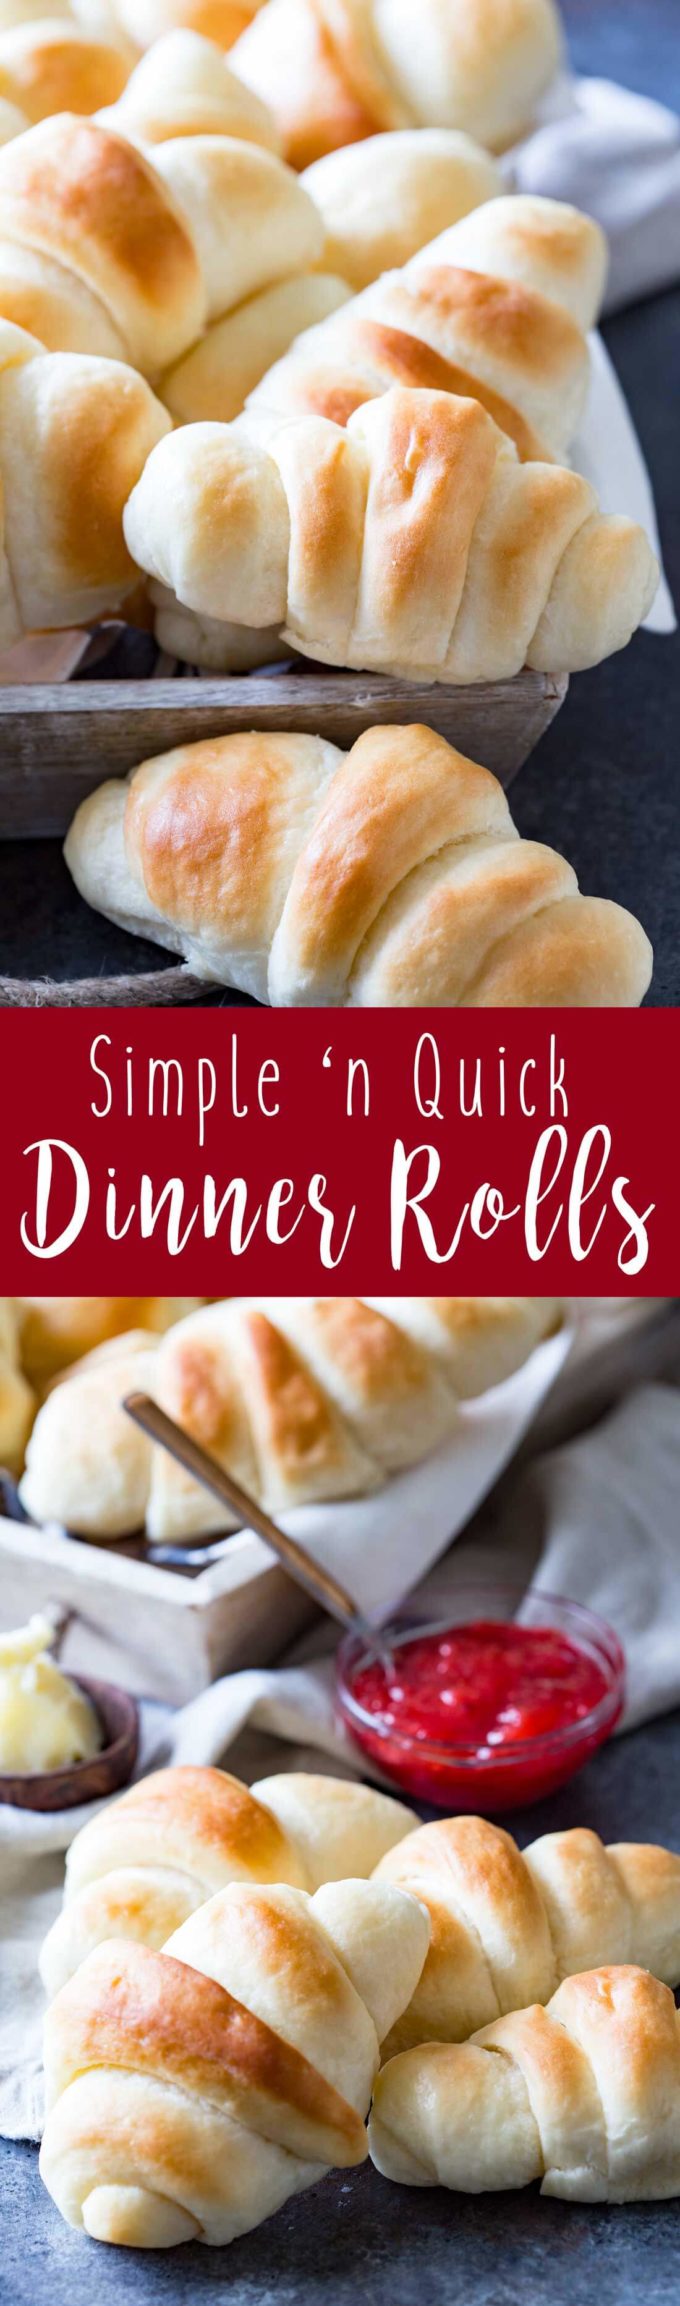 Simple and quick dinner rolls